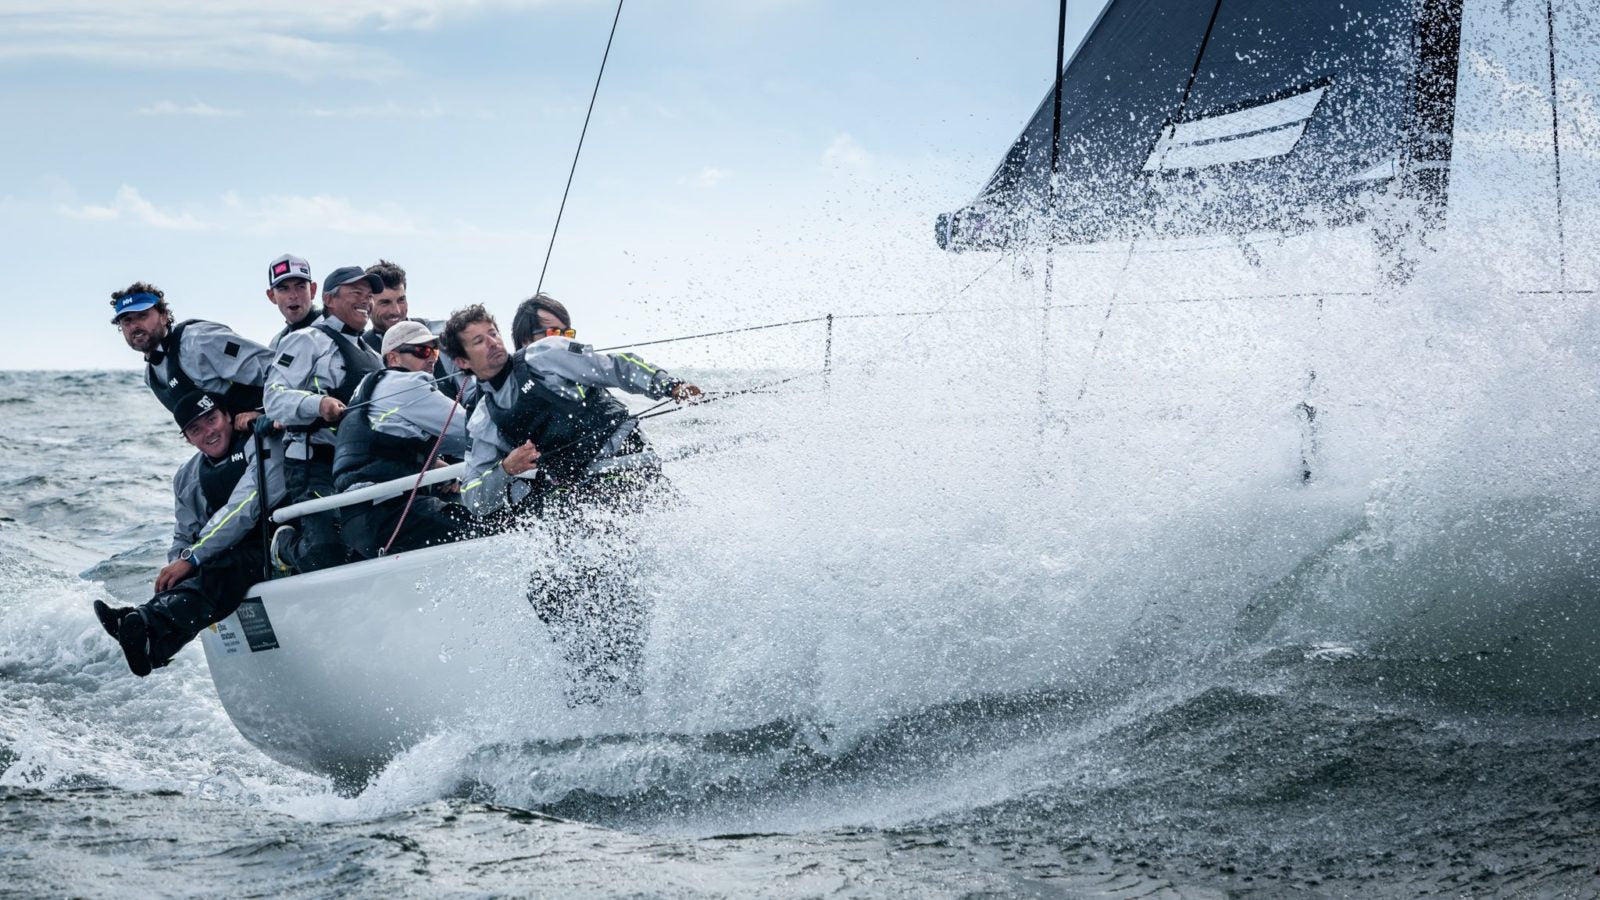 SUPER-CHARGED COMPETITION AND HIGH PERFORMANCE SAILING